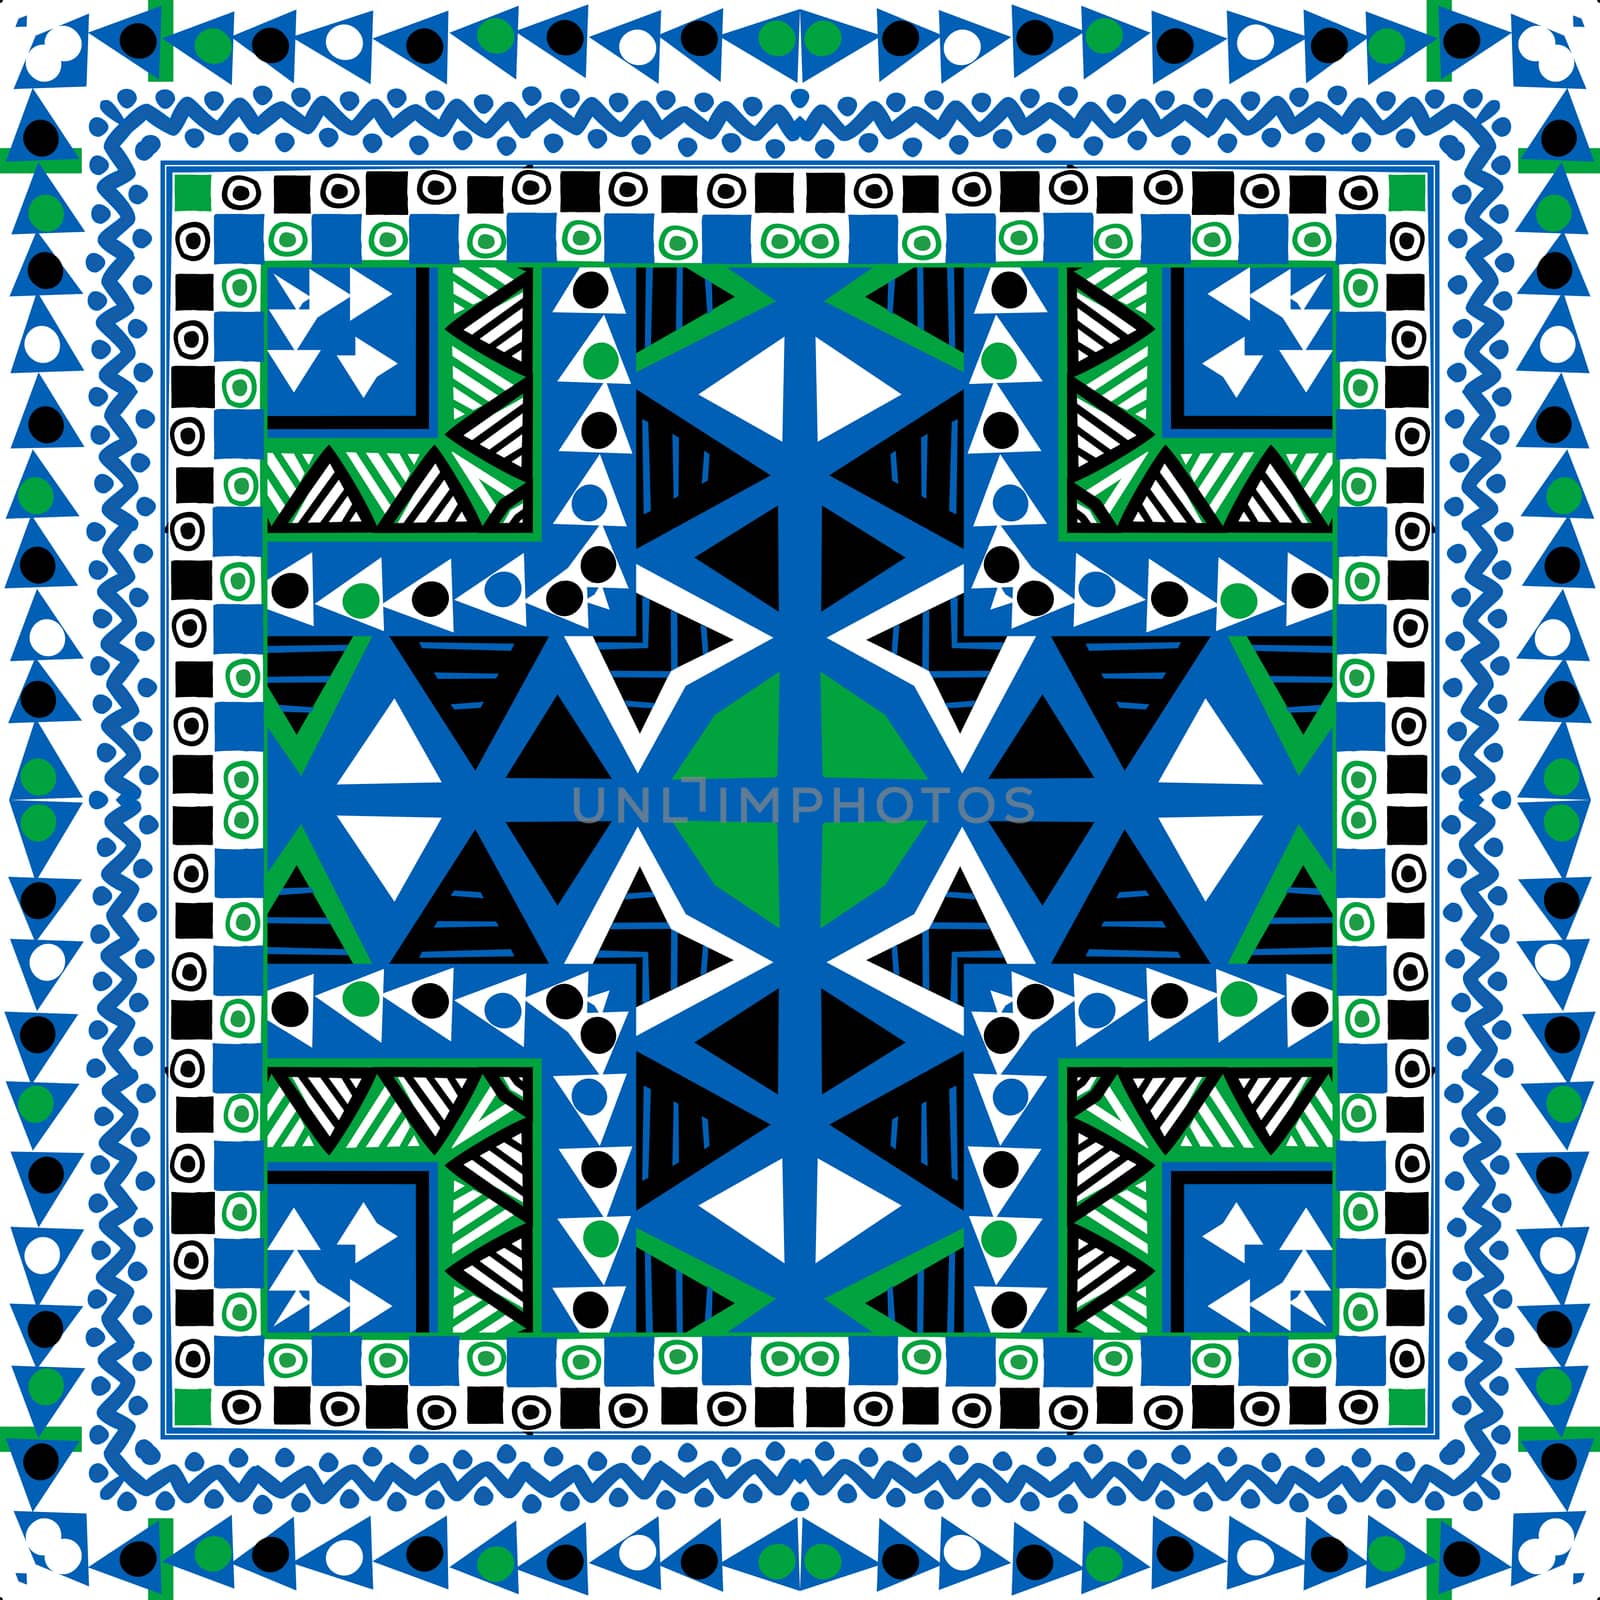 Geometrical background with ethnic motifs by hibrida13